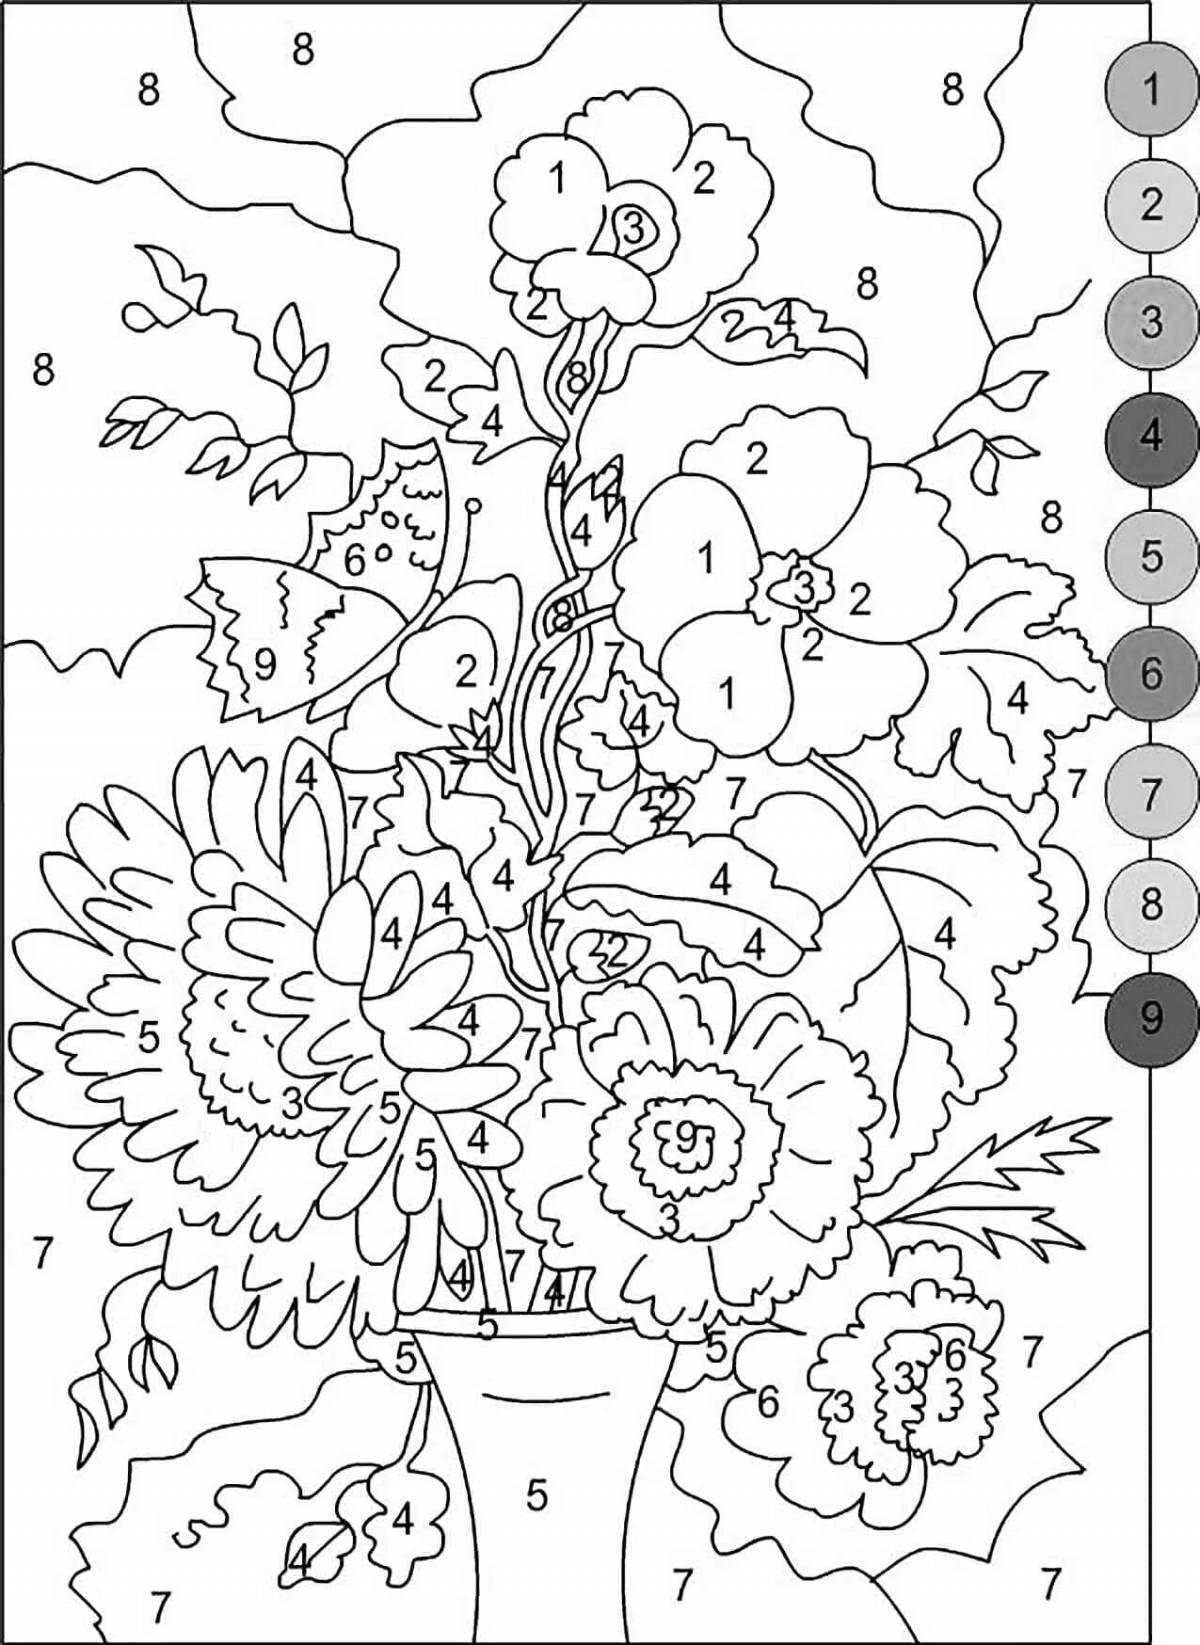 Attractive coloring book with numbers